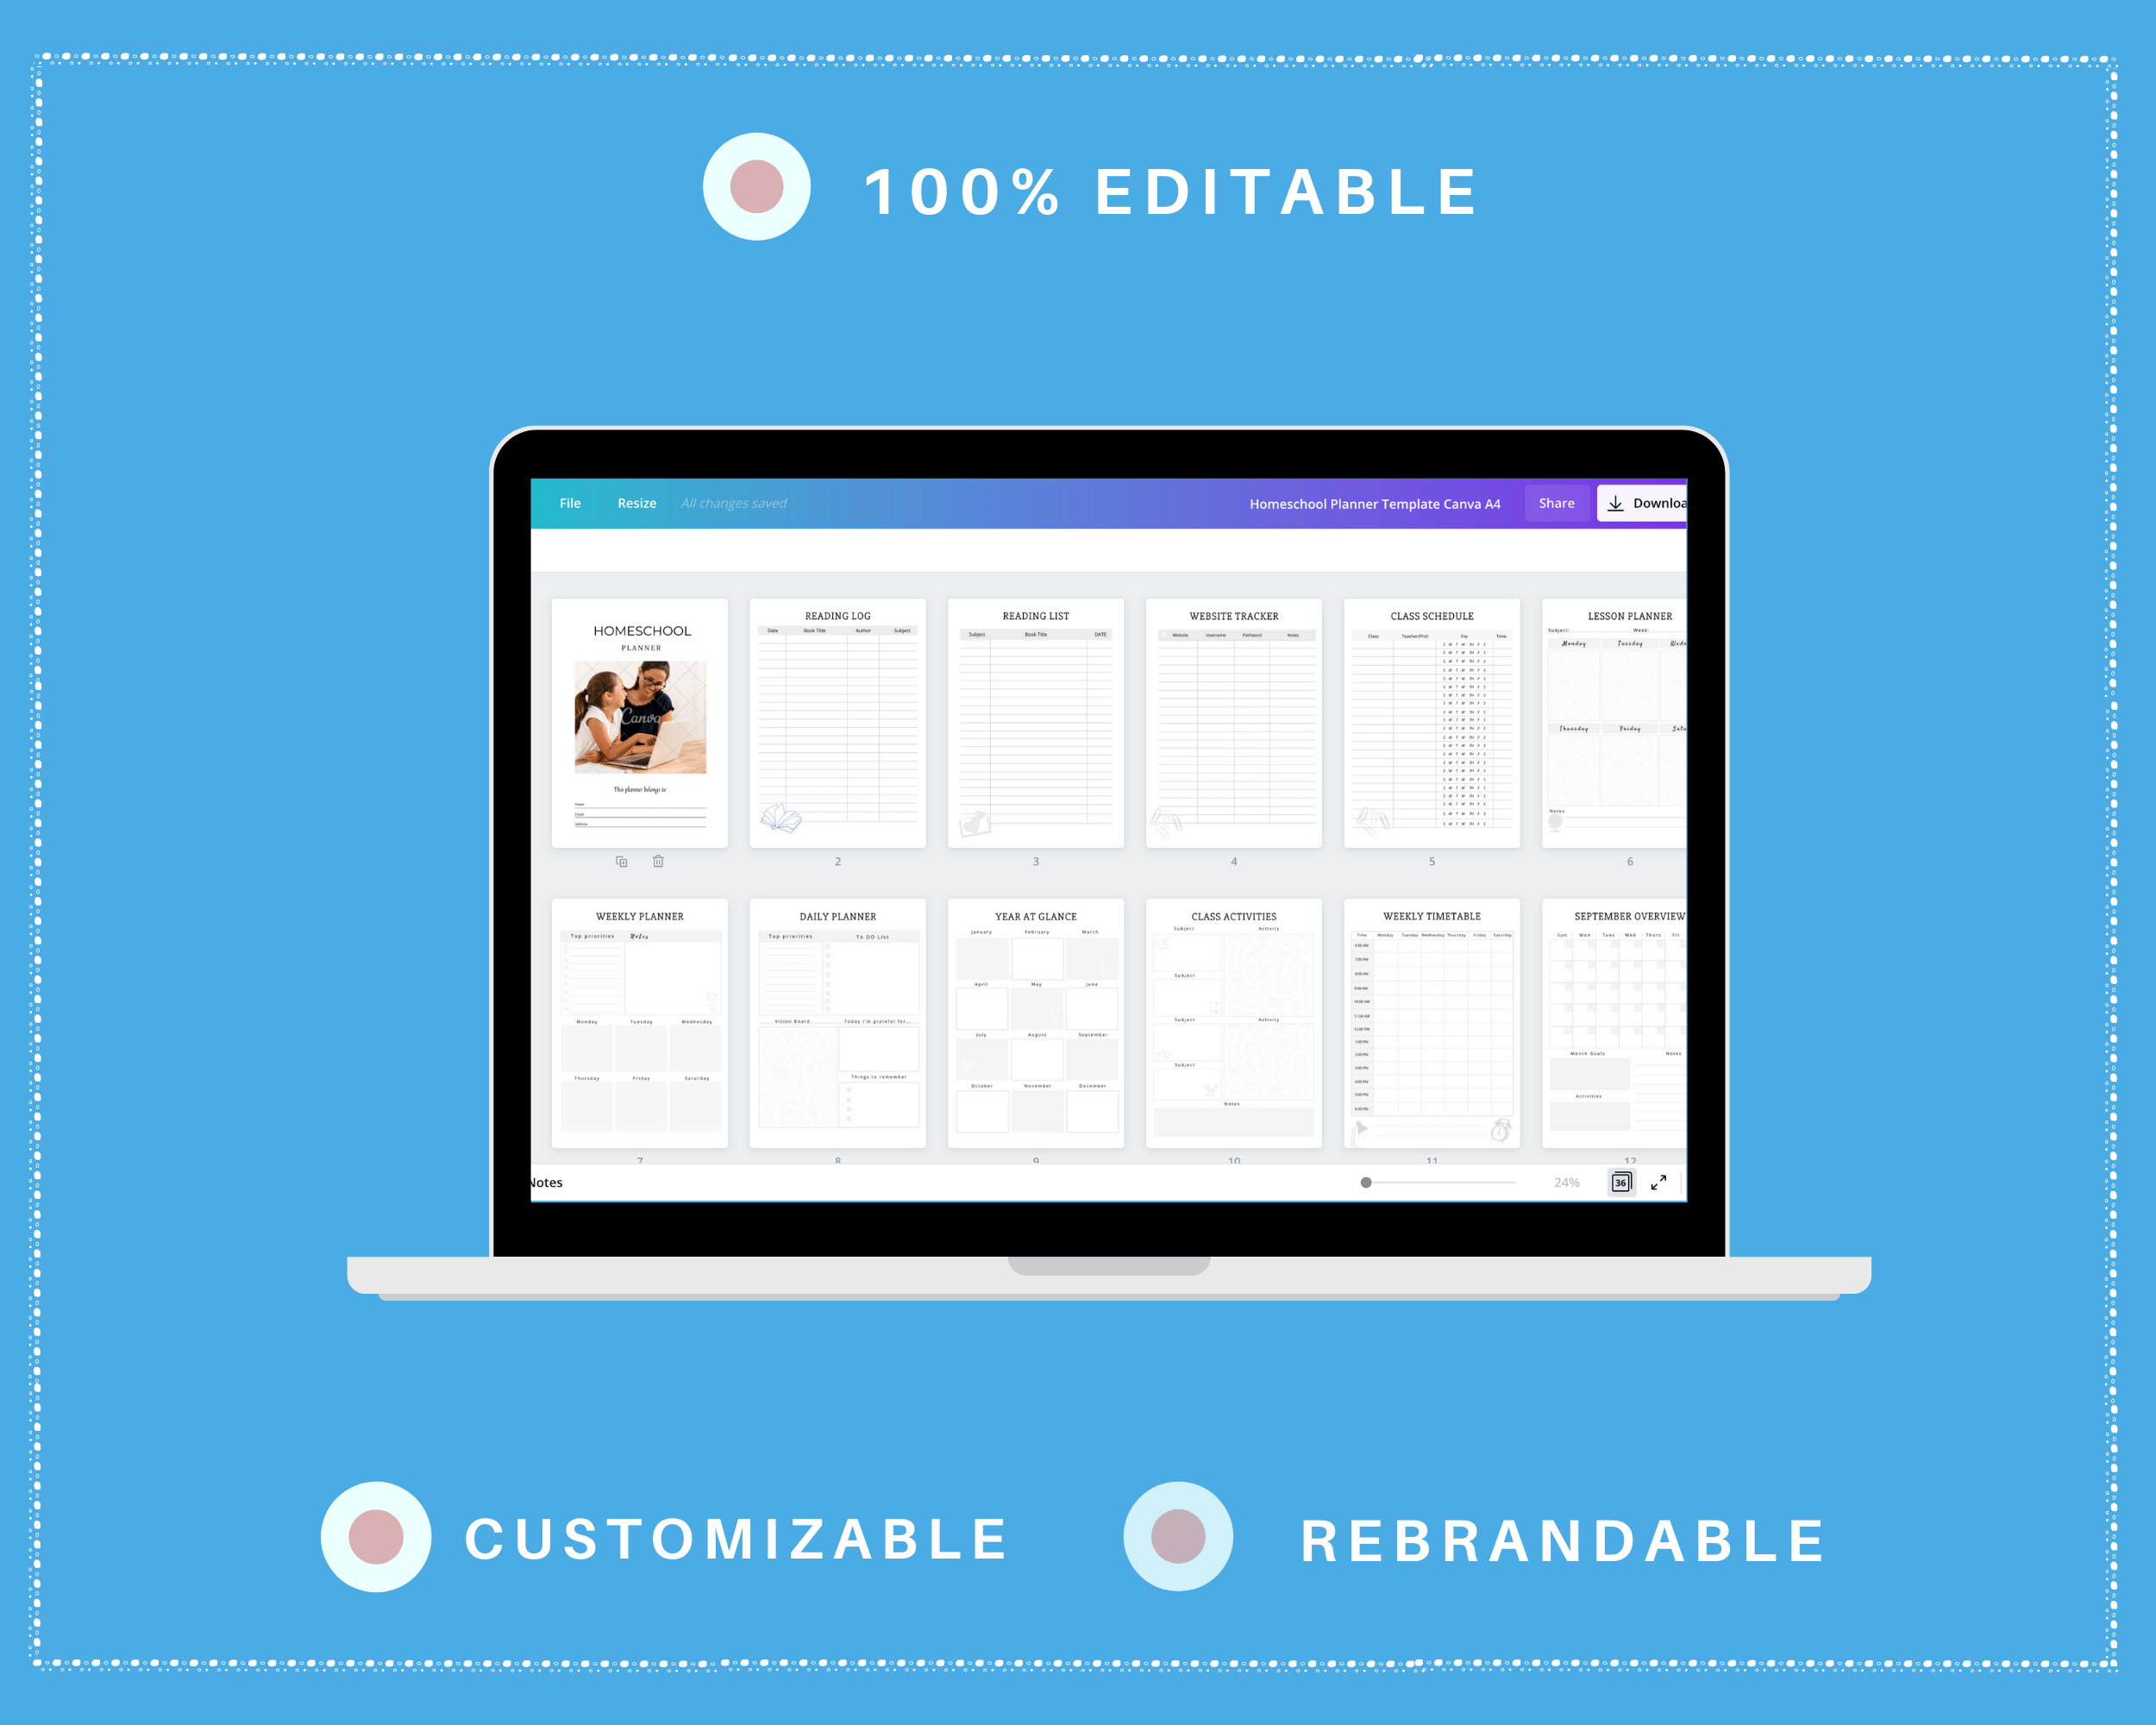 Editable Homeschool Planner in Canva | Commercial Use